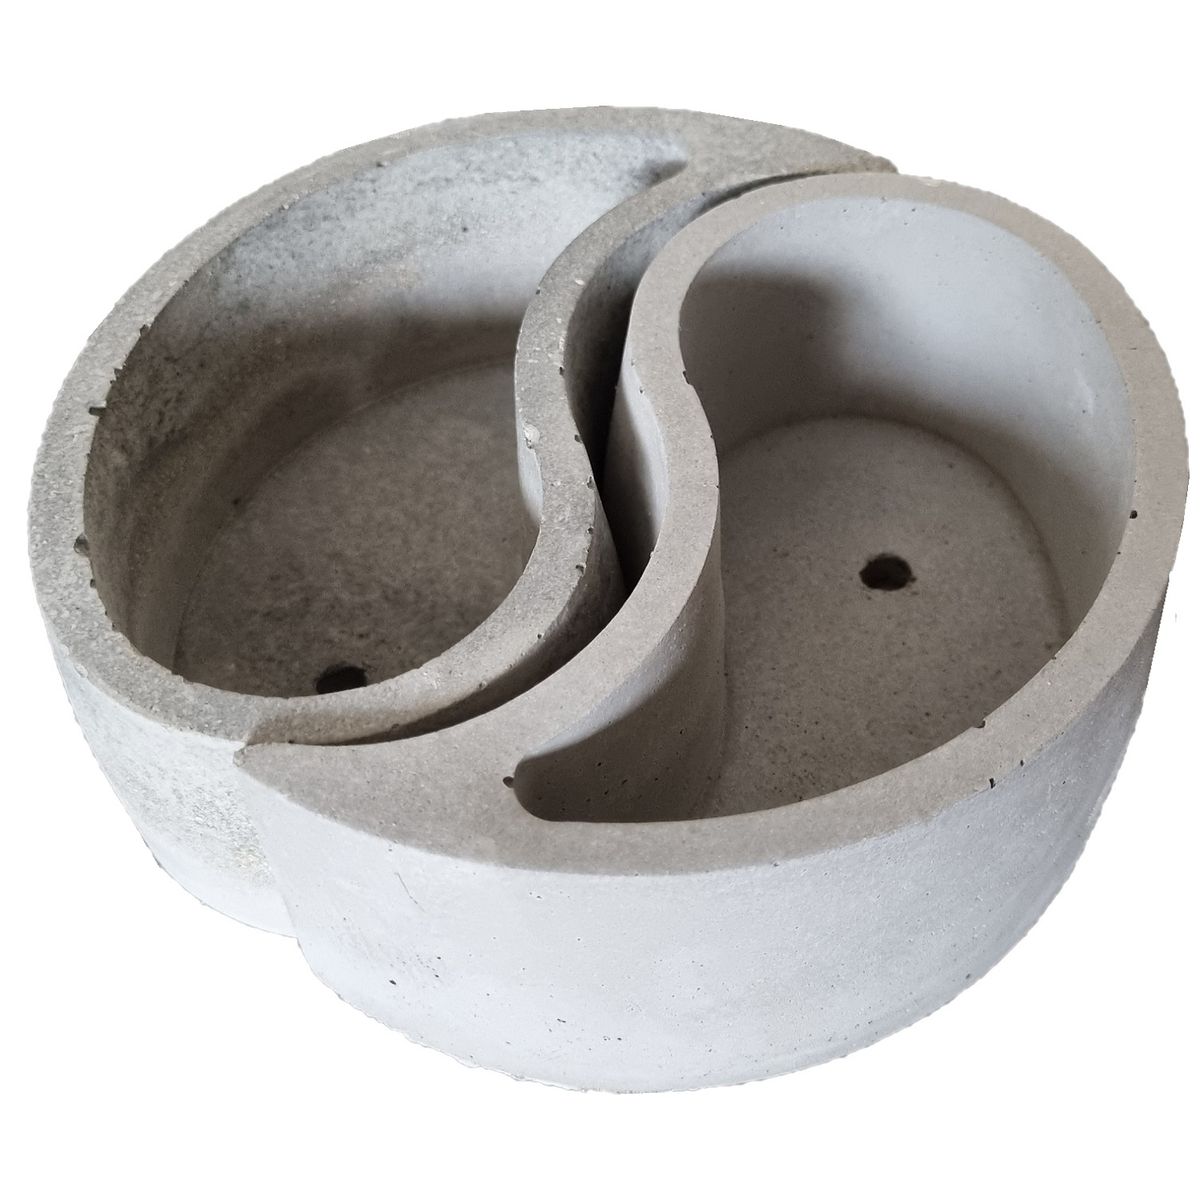 Ying and Yang Succulent Or Flower Cement Concrete Pot Planter Handmade